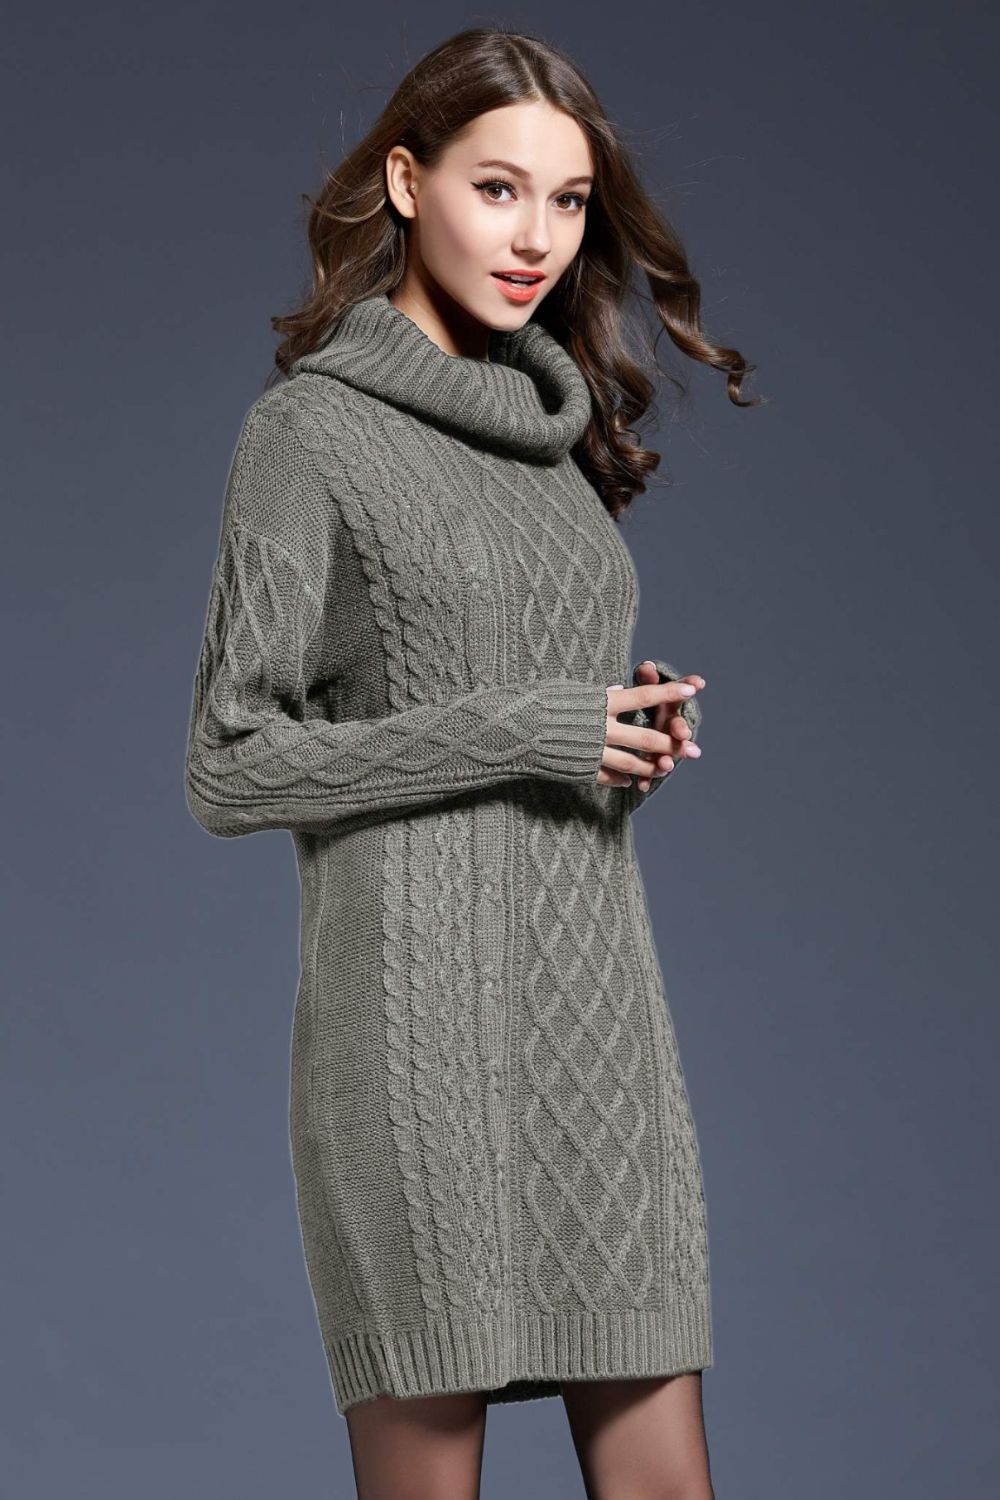 Woven Right Full Size Mixed Knit Cowl Neck Dropped Shoulder Sweater Dress - Body By J'ne